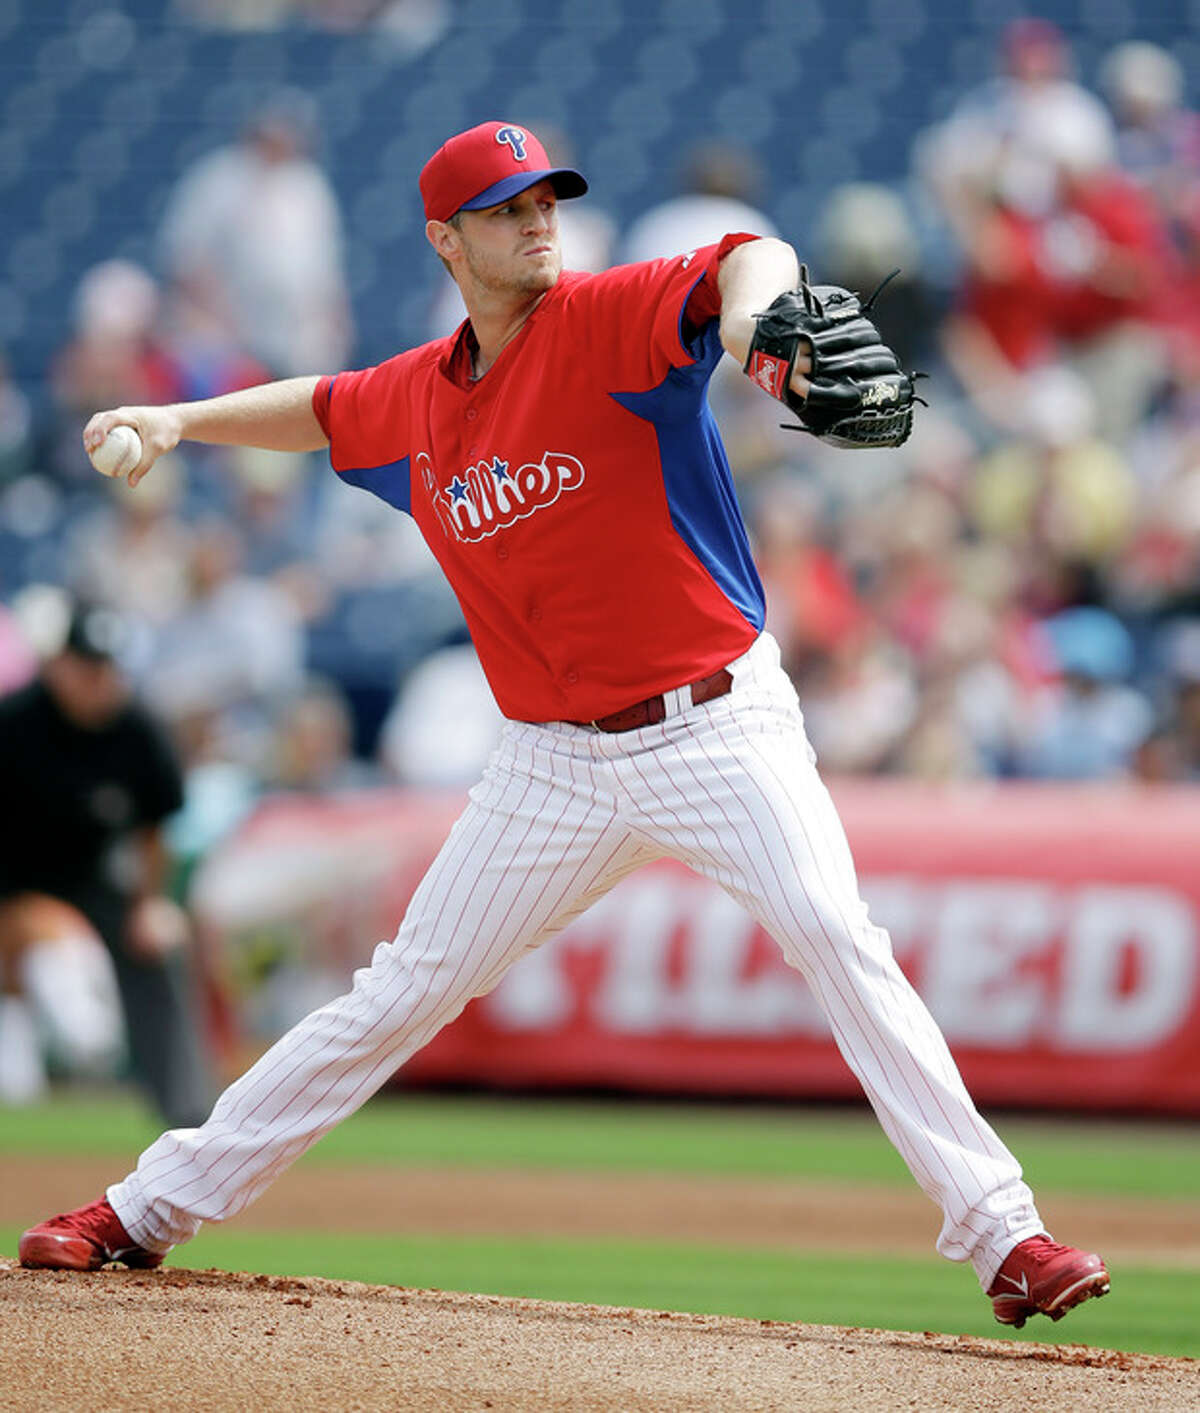 Philadelphia Phillies' Kyle Kendrick pitches during the first inning of an exhibition spring training baseball game against the New York Yankees, Tuesday, Feb. 26, 2013, in Clearwater, Fla. (AP Photo/Matt Slocum)